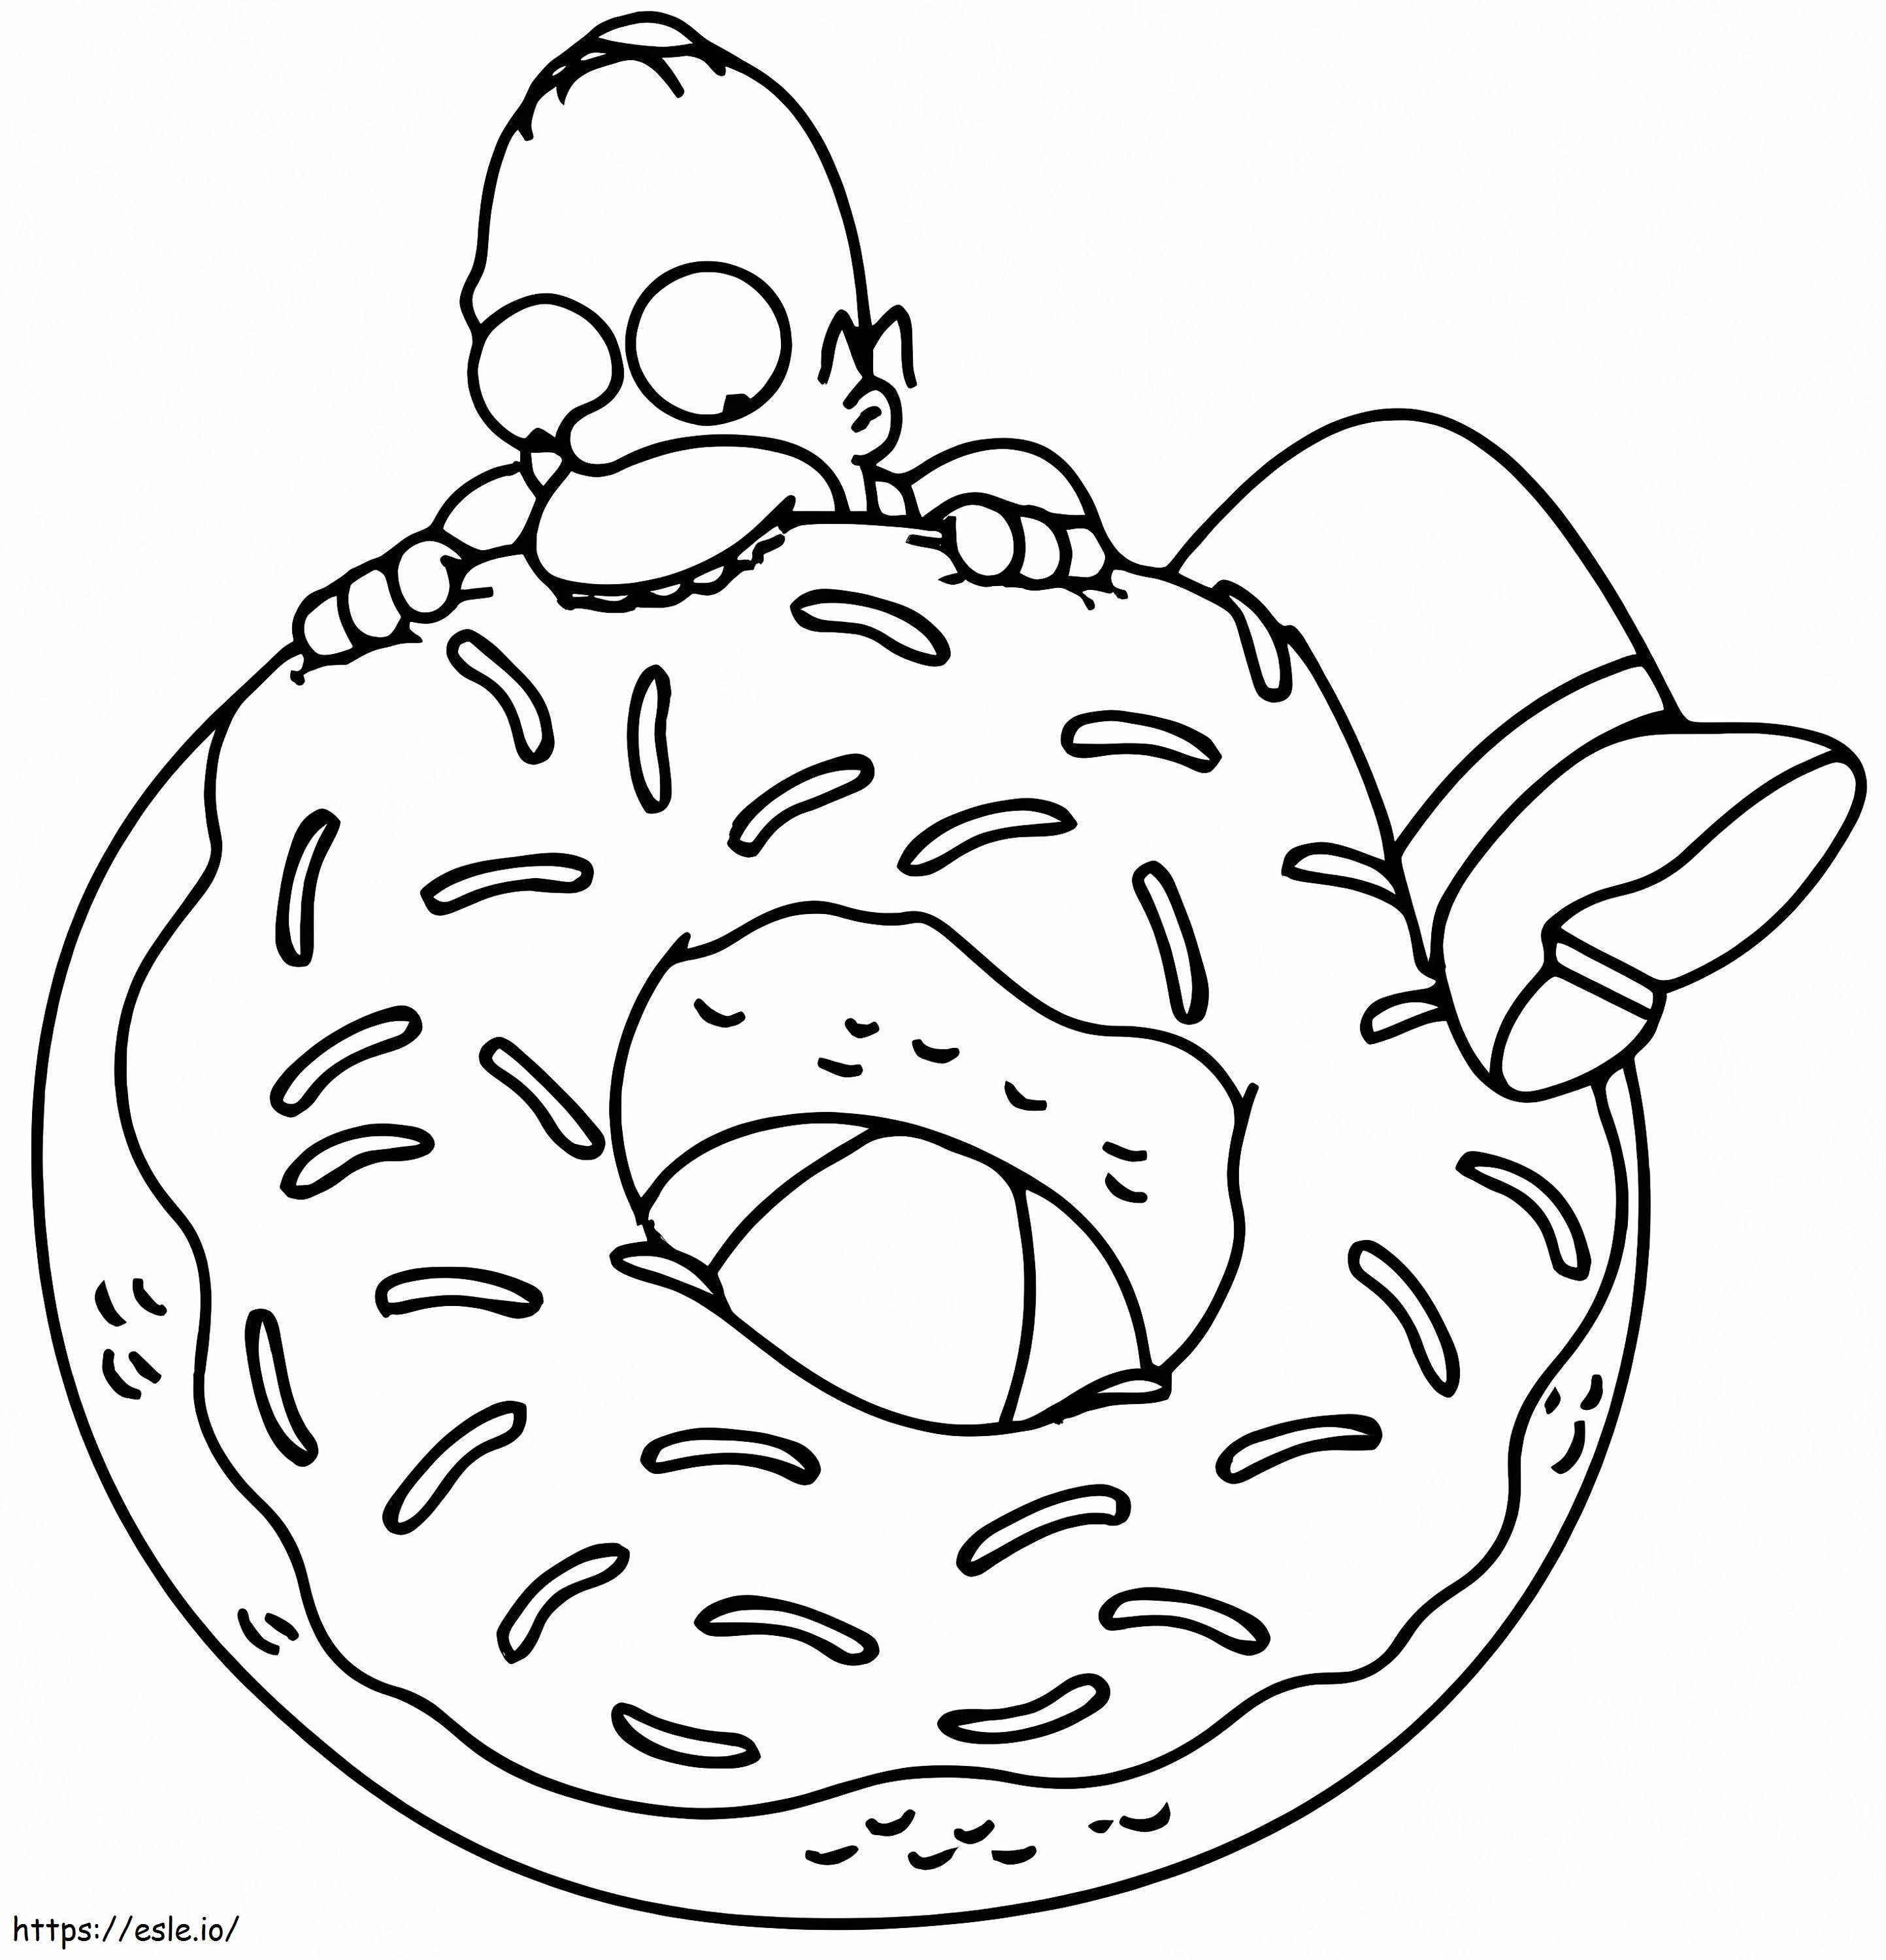 Homer Simpson Eating Donut coloring page